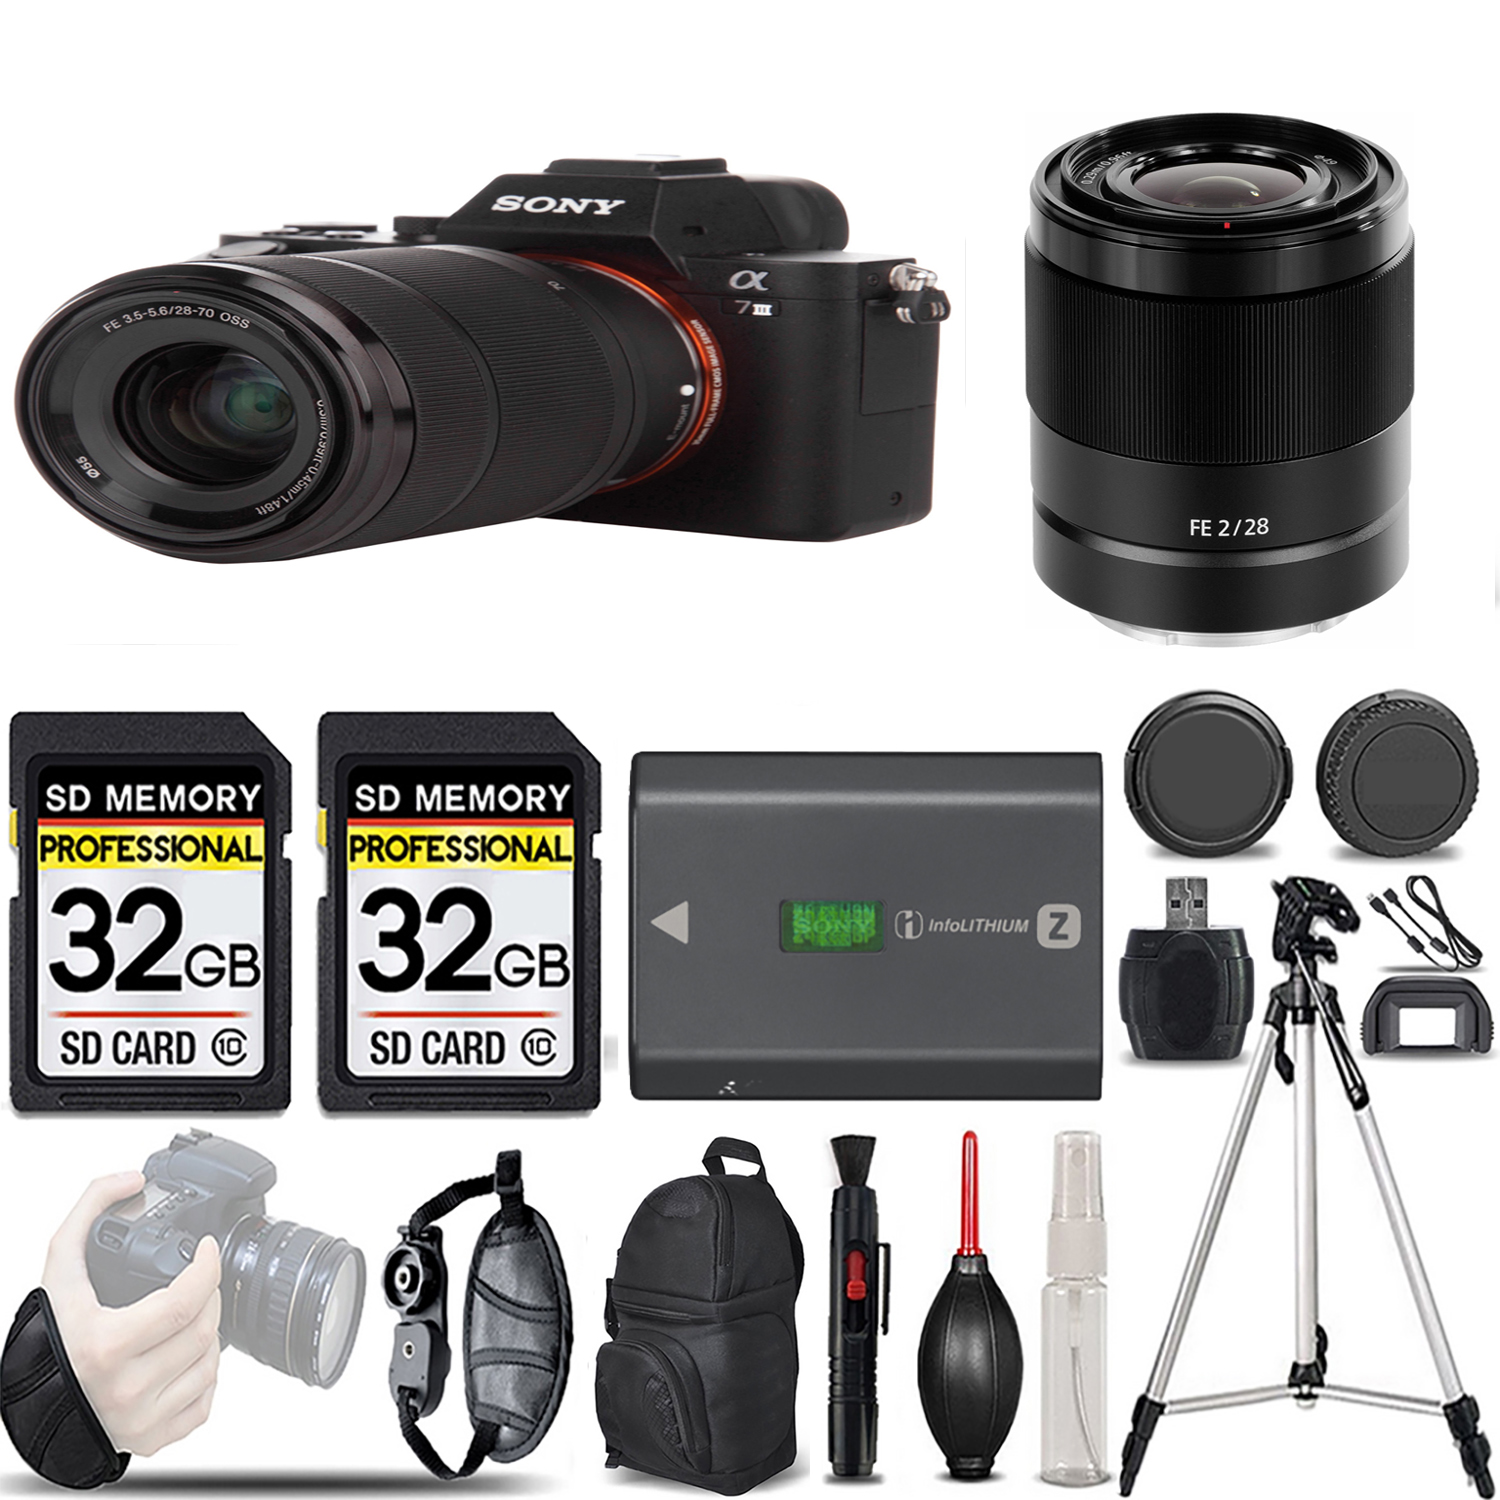 a7 III  Camera + 28-70mm Lens + 28mm f/2 Lens + Extra Battery + 64GB -Basic Kit *FREE SHIPPING*